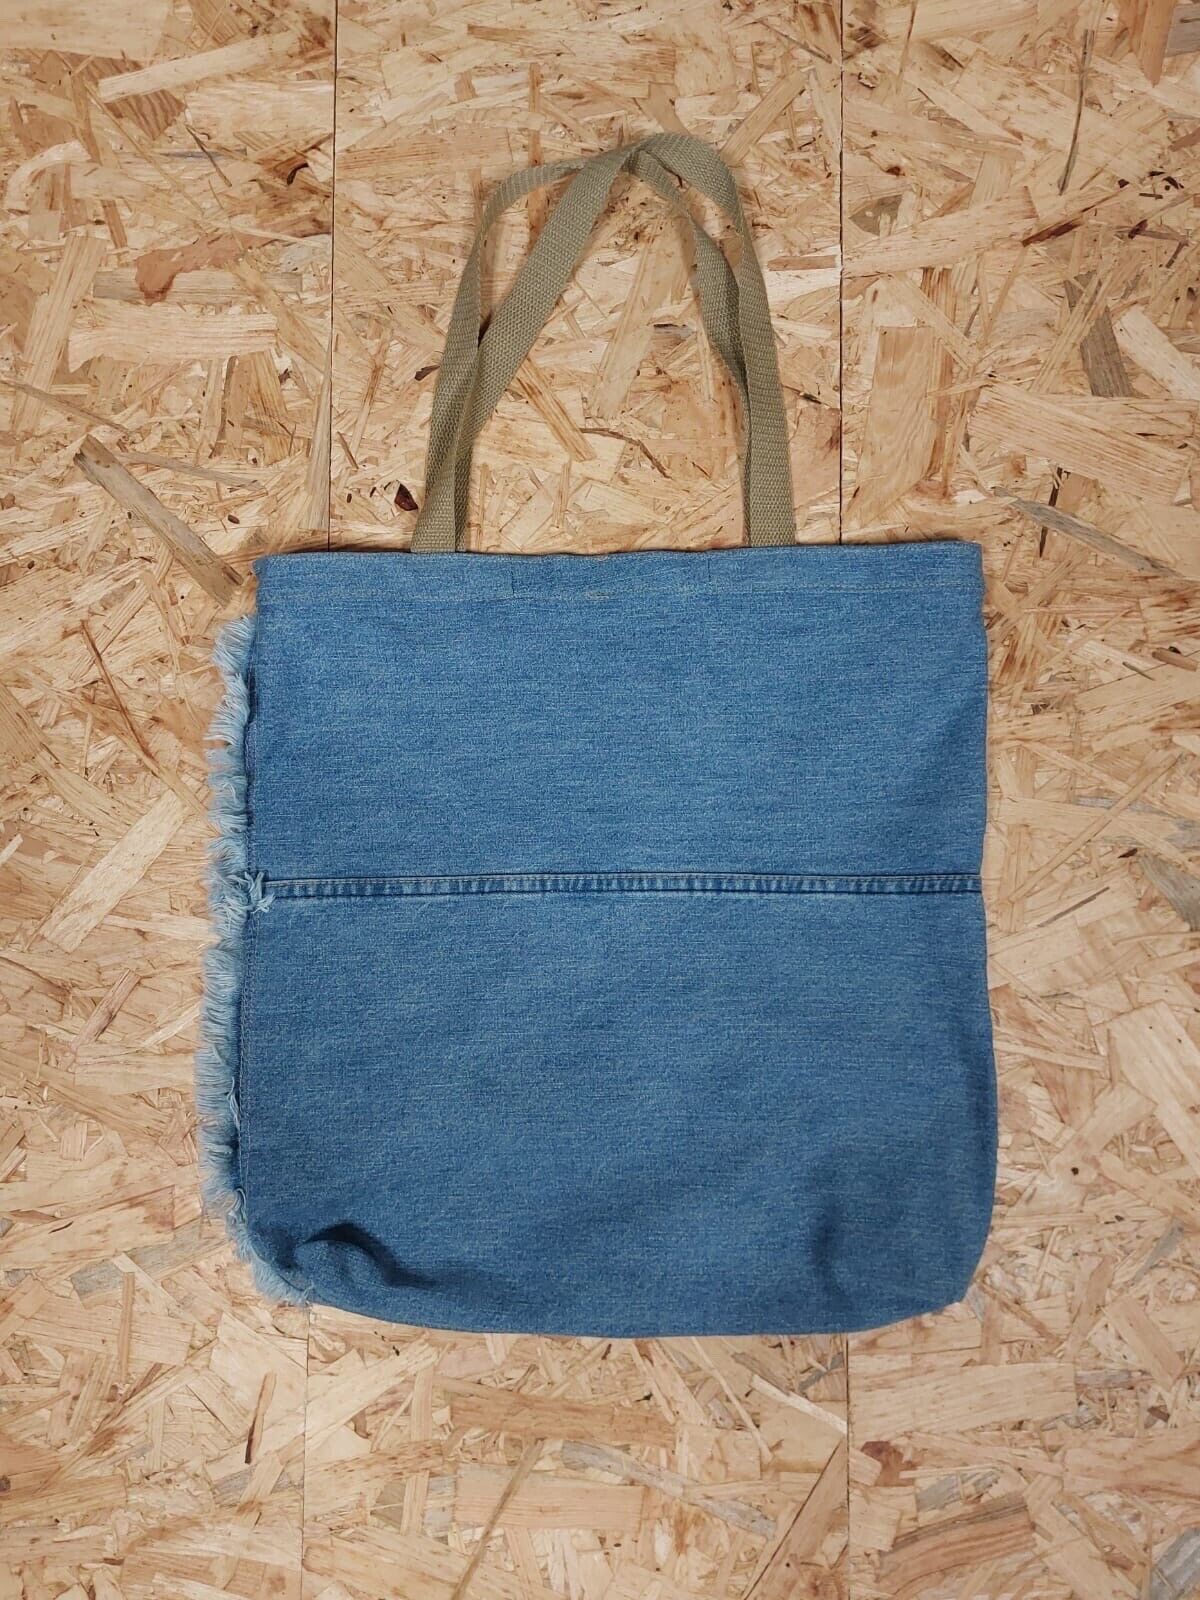 Denim Tote Jean Bag - Made From Levi Denim Blue Cotton - Pride - Upcycled